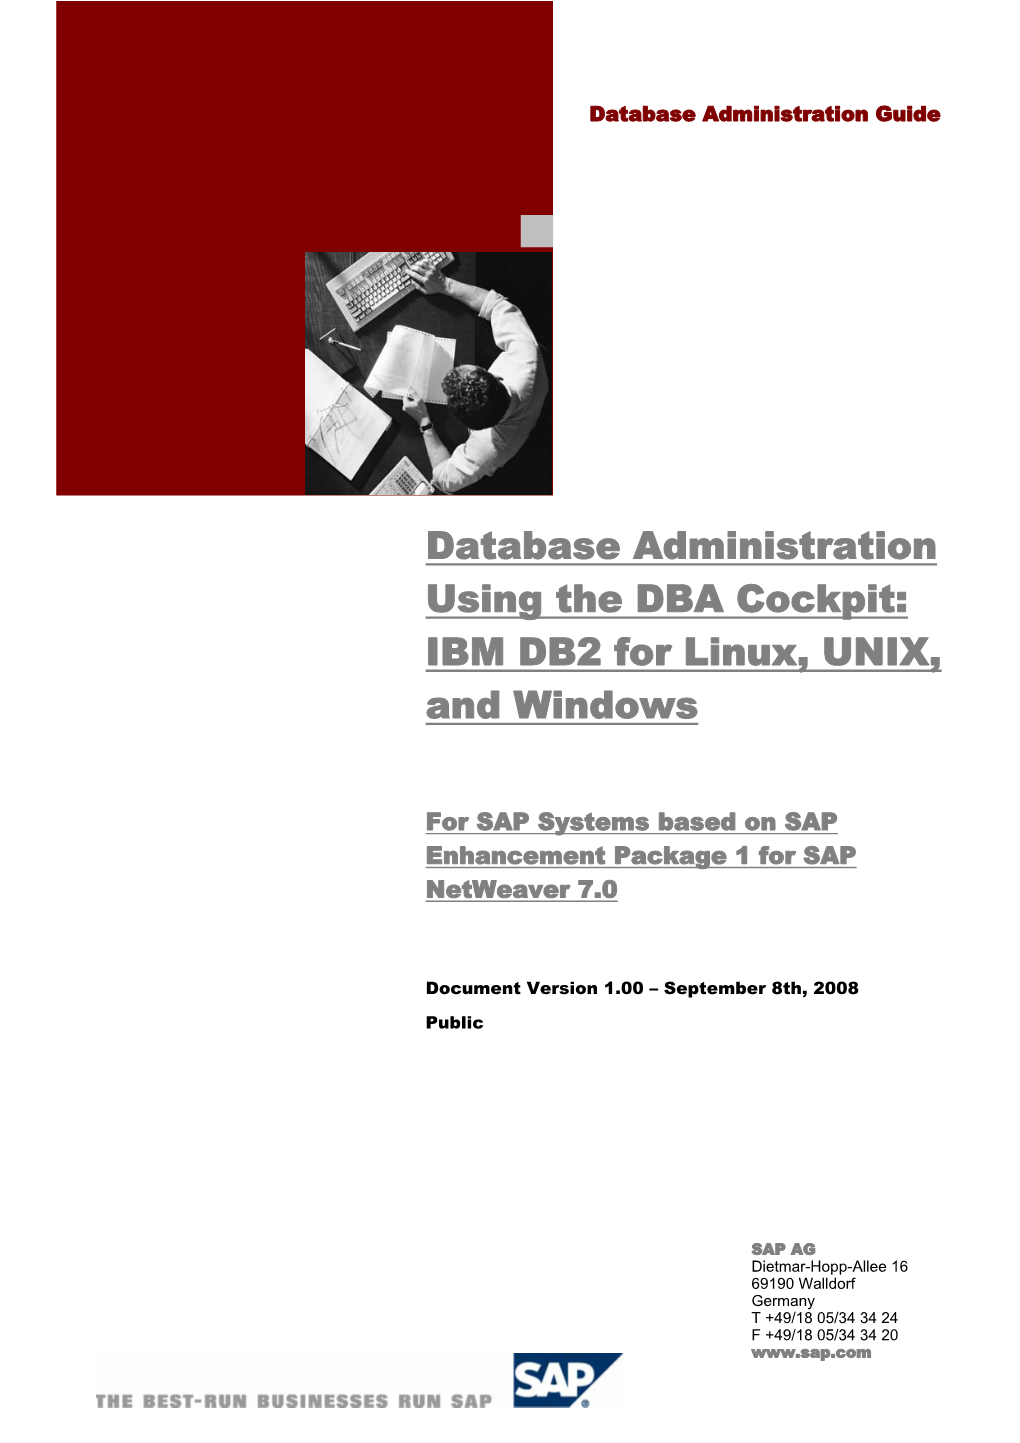 Migration to Version 7 of the IBM DB2 Universal Database